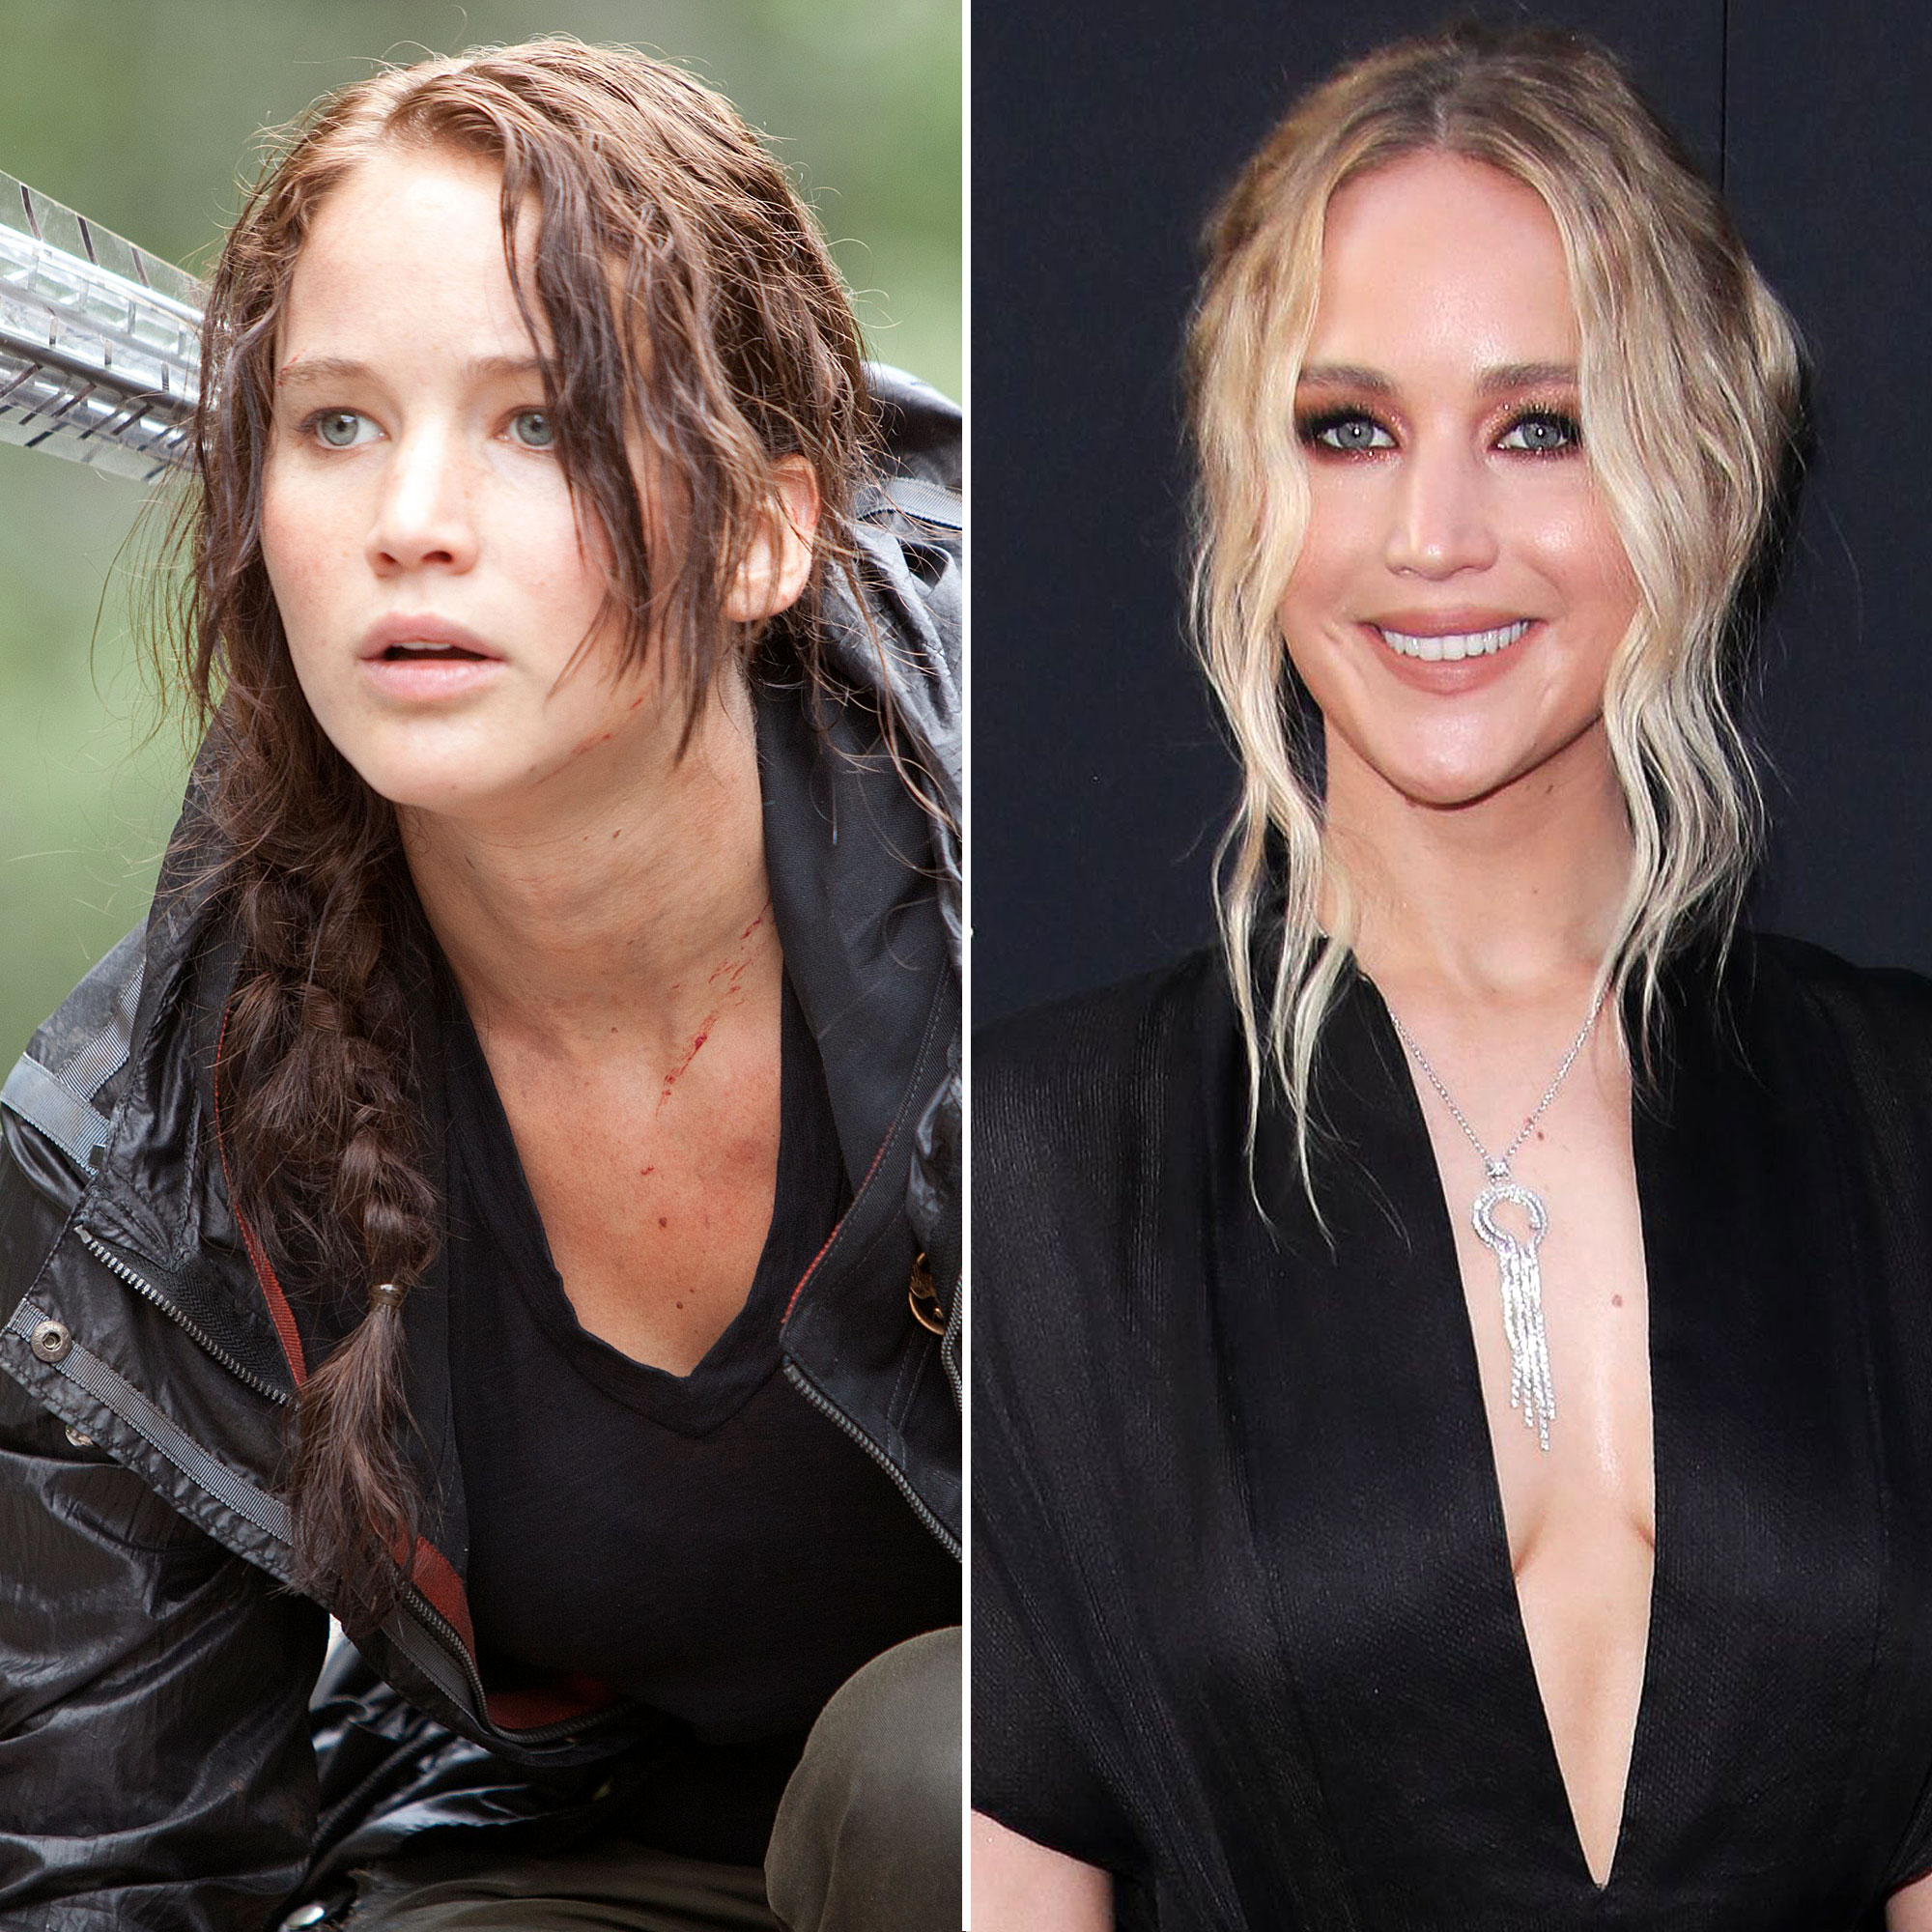 The Hunger Games' Cast: Where Are They Now?